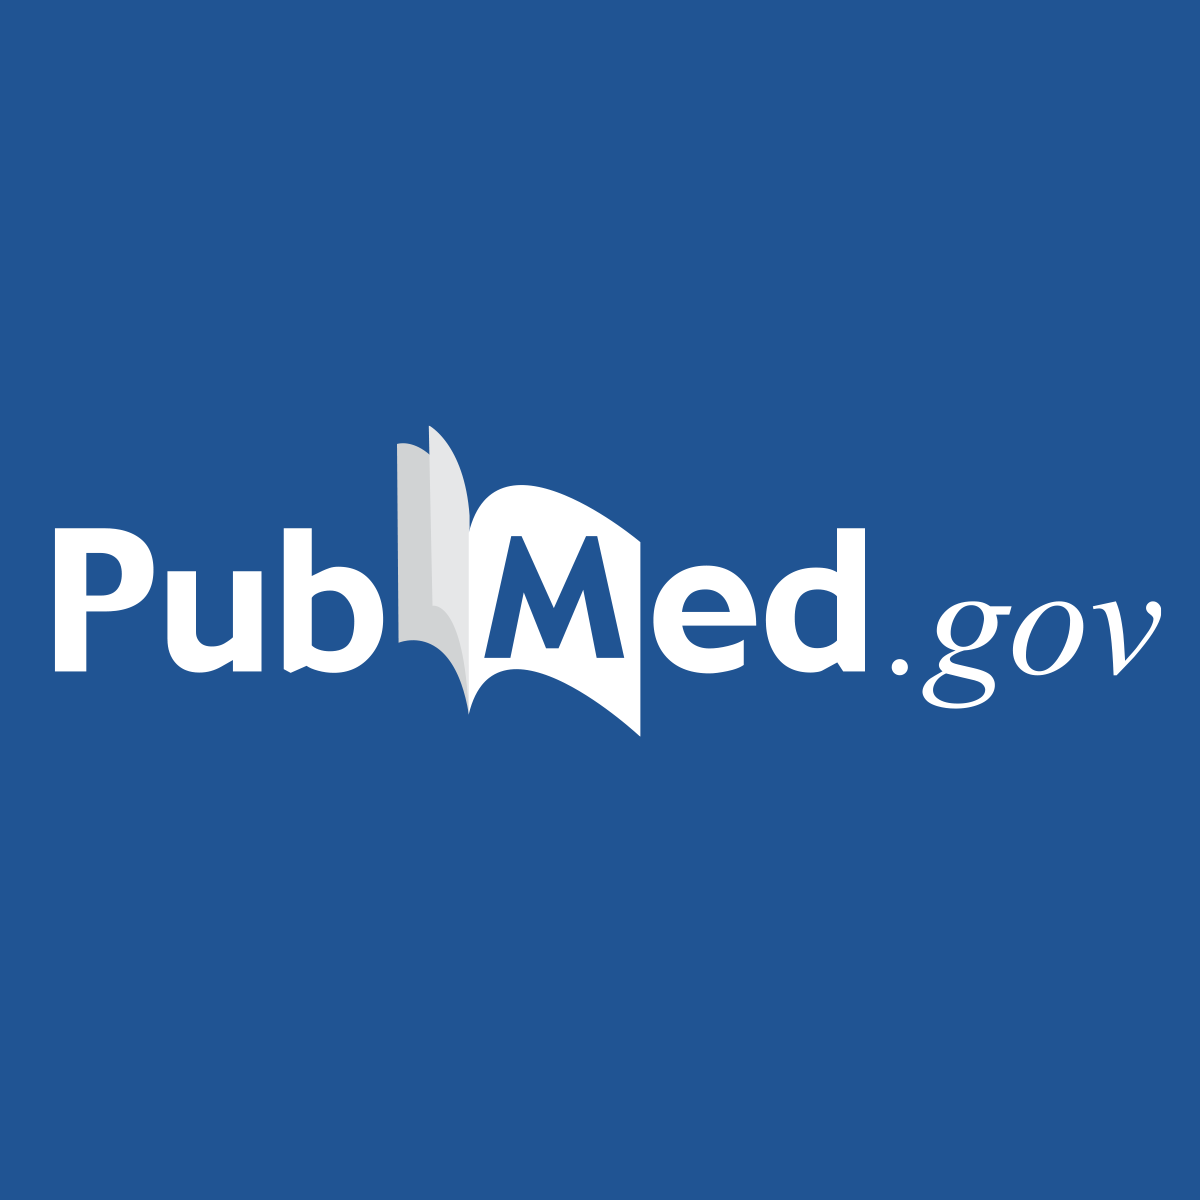 Randomized phase II study to determine the optimal dose of 3-week cycle nab-paclitaxel in patients with metastatic breast cancer - PubMed